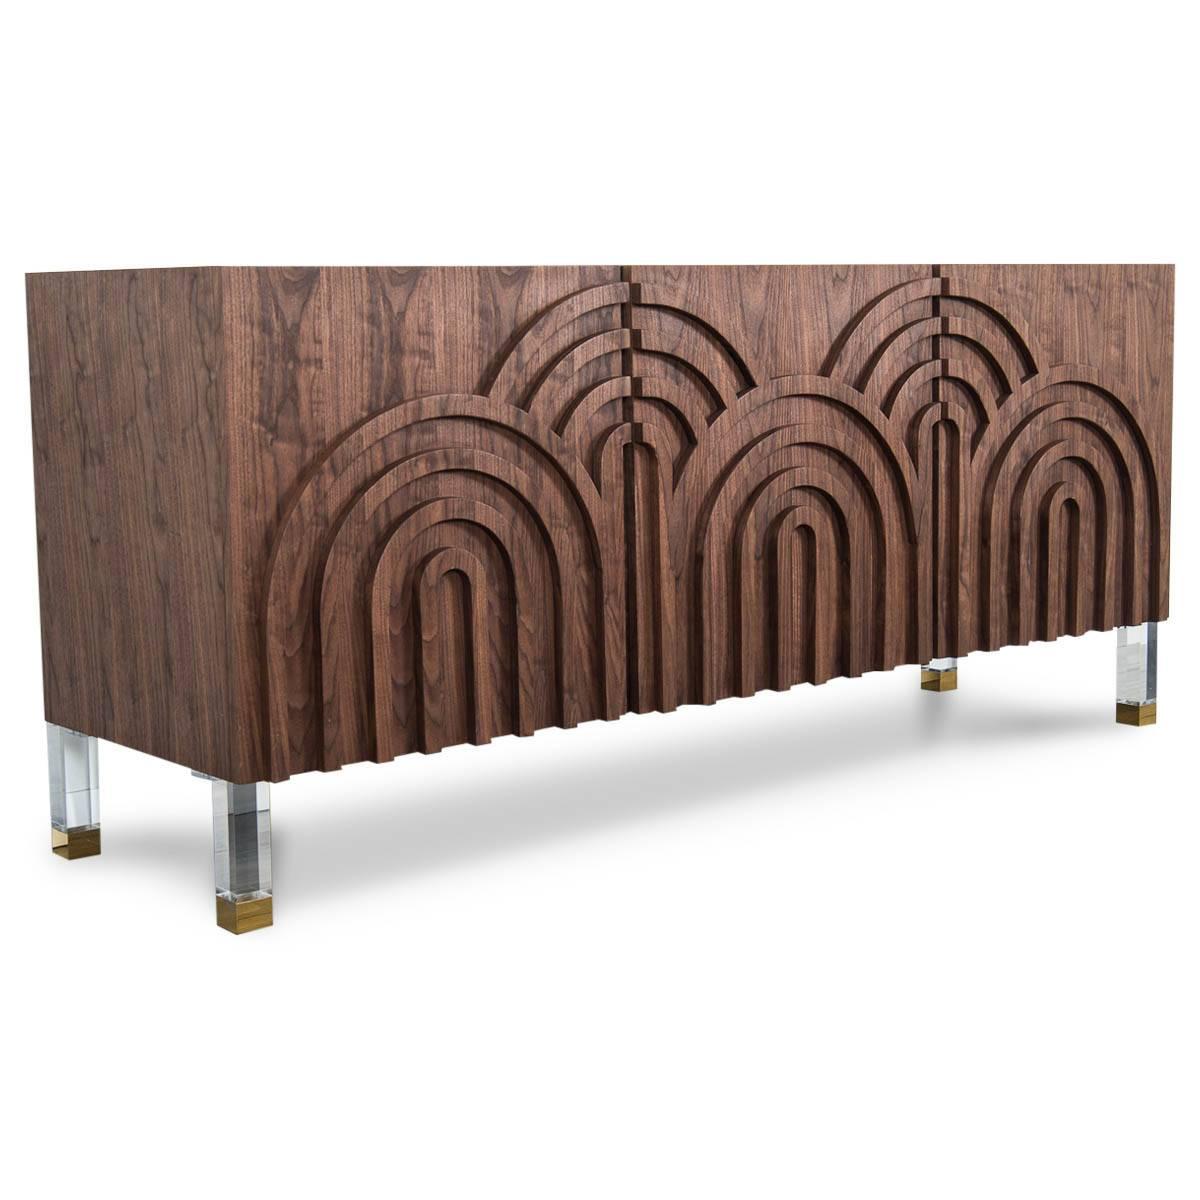 Elegant and symmetrical, the Arches 3 Door Credenza shows off its style and sophistication through its three arched doors and its 7